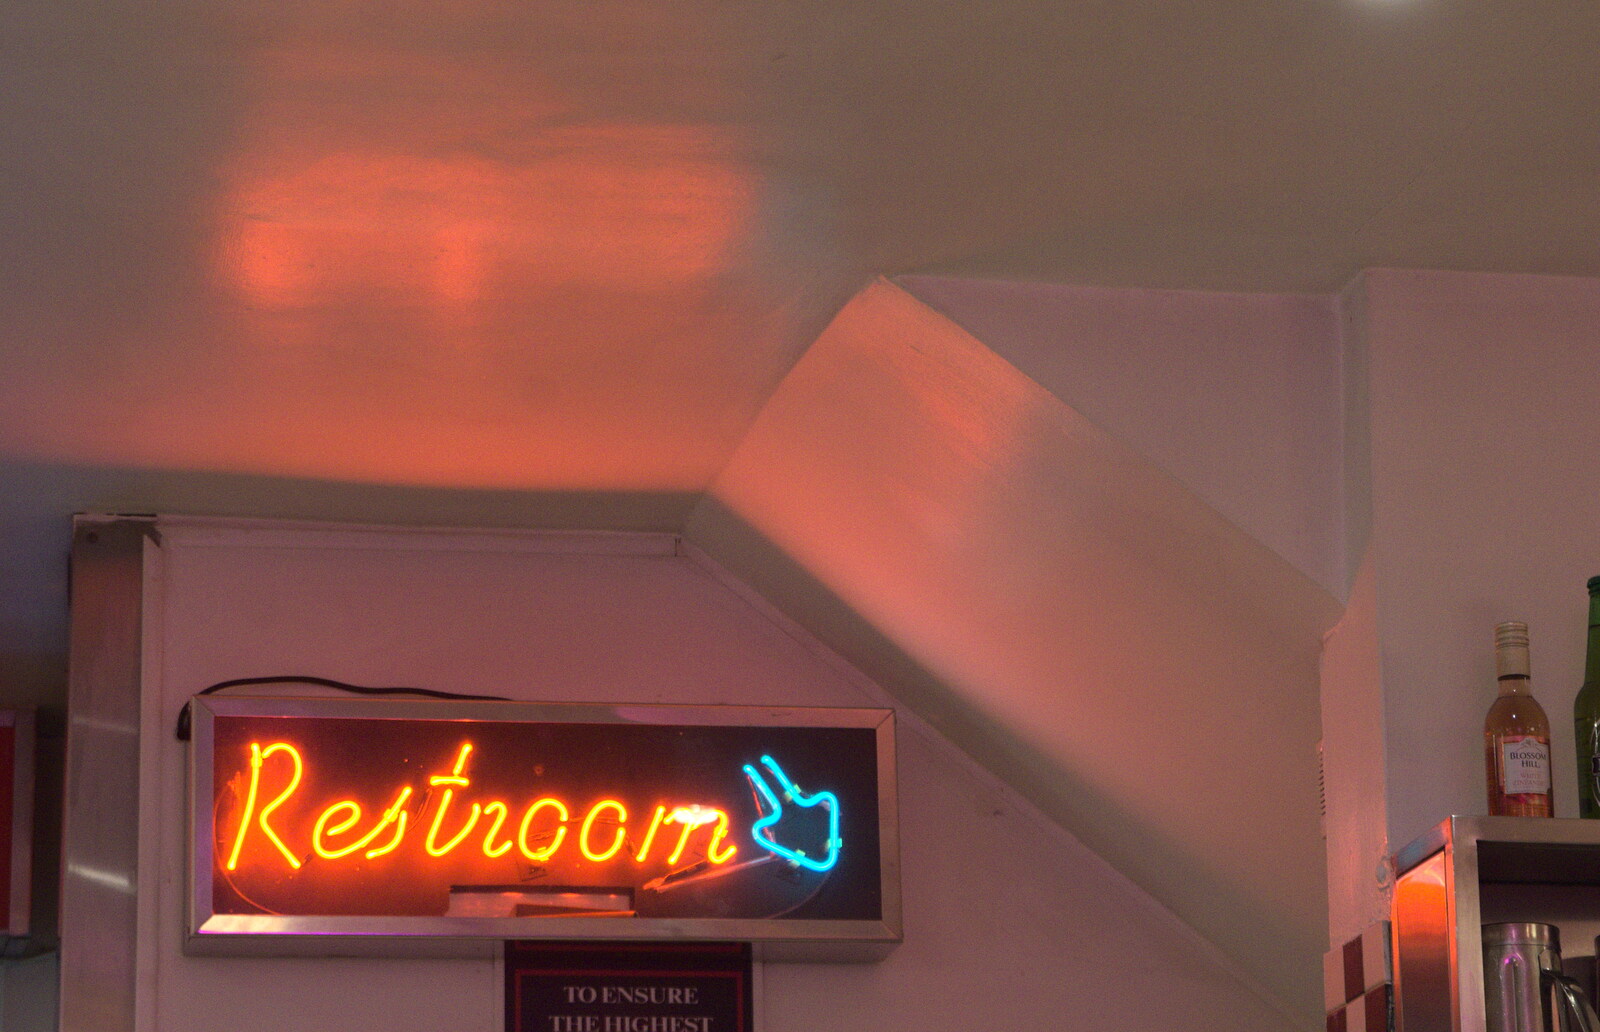 A neon restroom sign from Christmas Eve in Dublin and Blackrock, Ireland - 24th December 2015